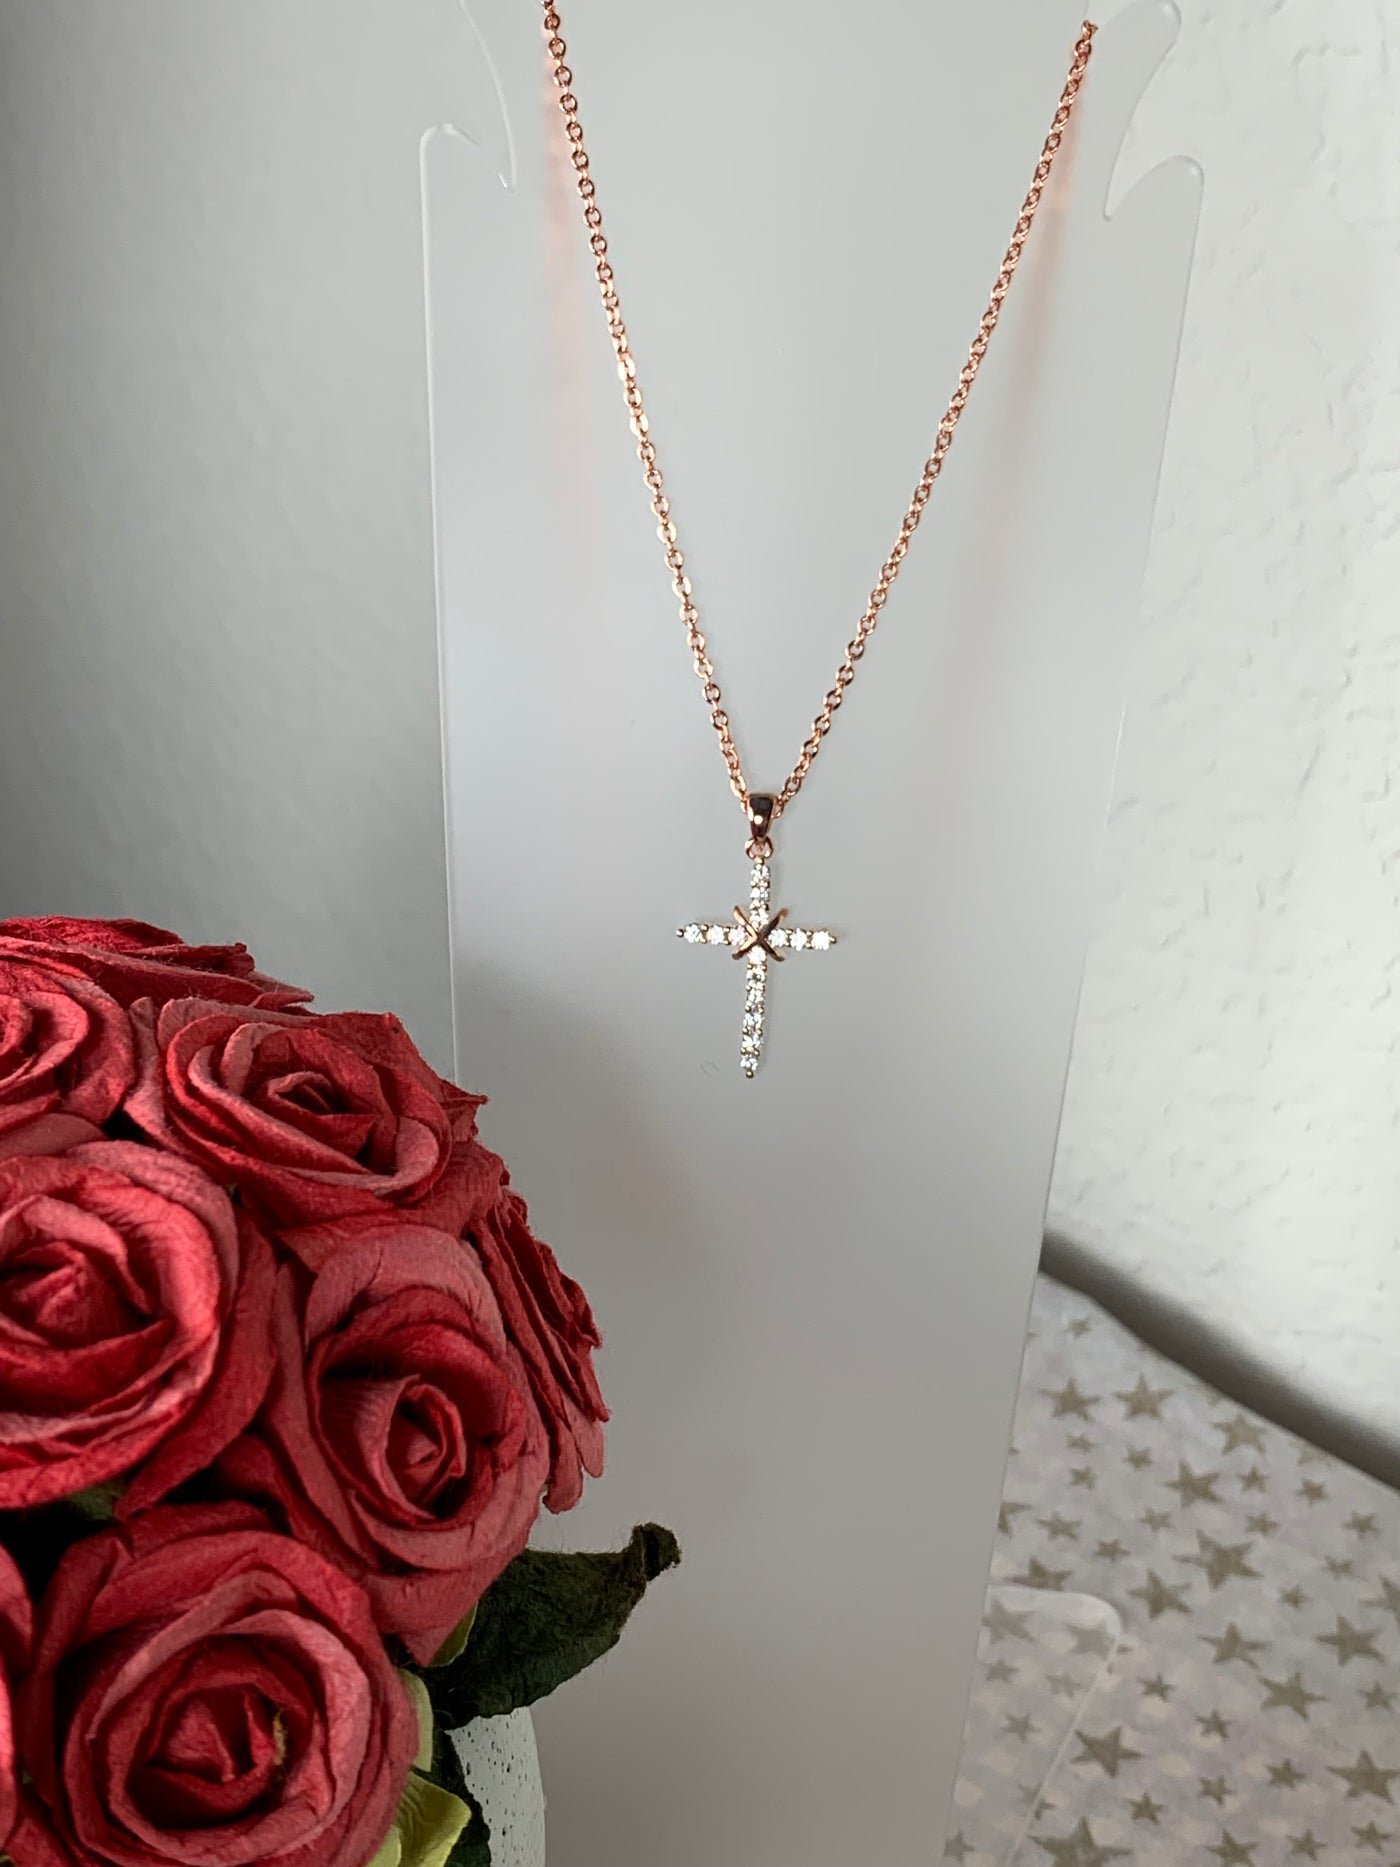 Shiny CZ Cross Pendant in Silver Tone, Yellow Gold Tone and Rose Gold Tone